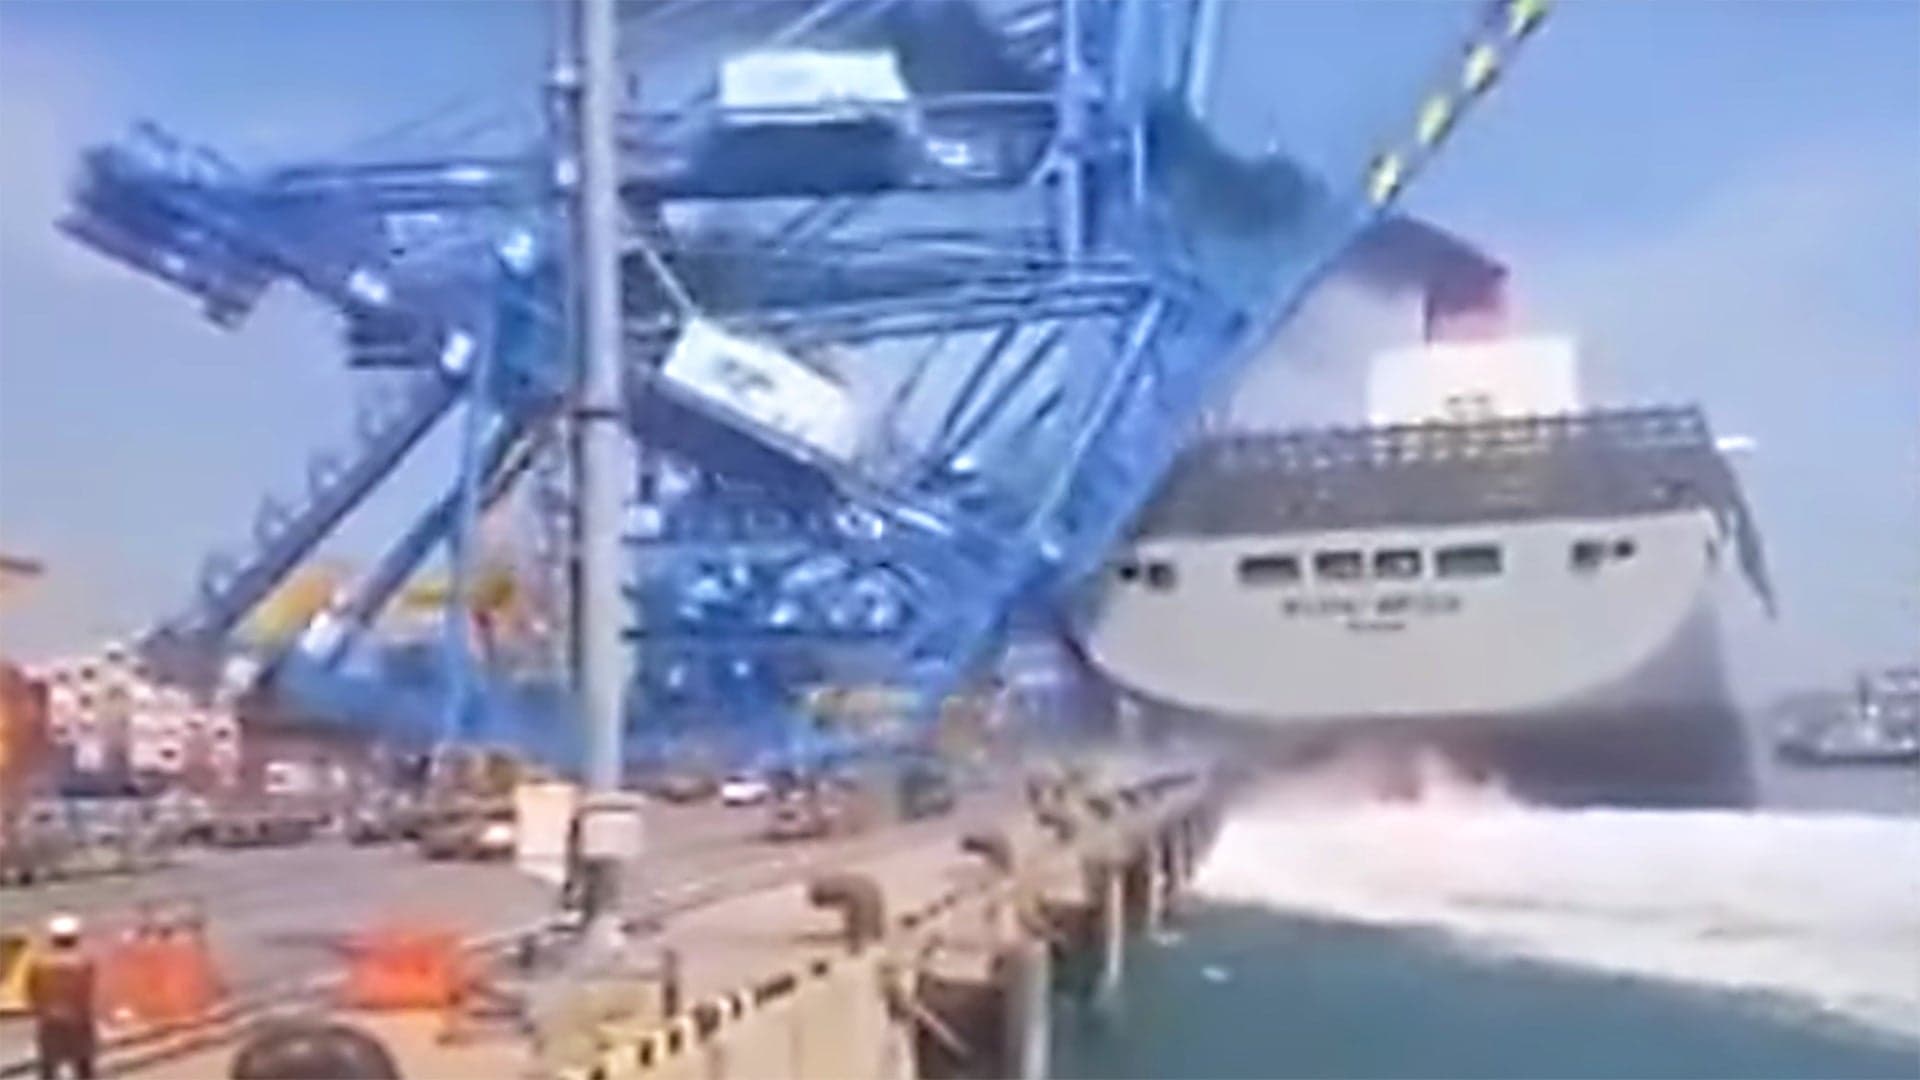 This Out Of Control Cargo Ship Creaming A Huge Dock Crane Is Like Something Out Of Godzilla